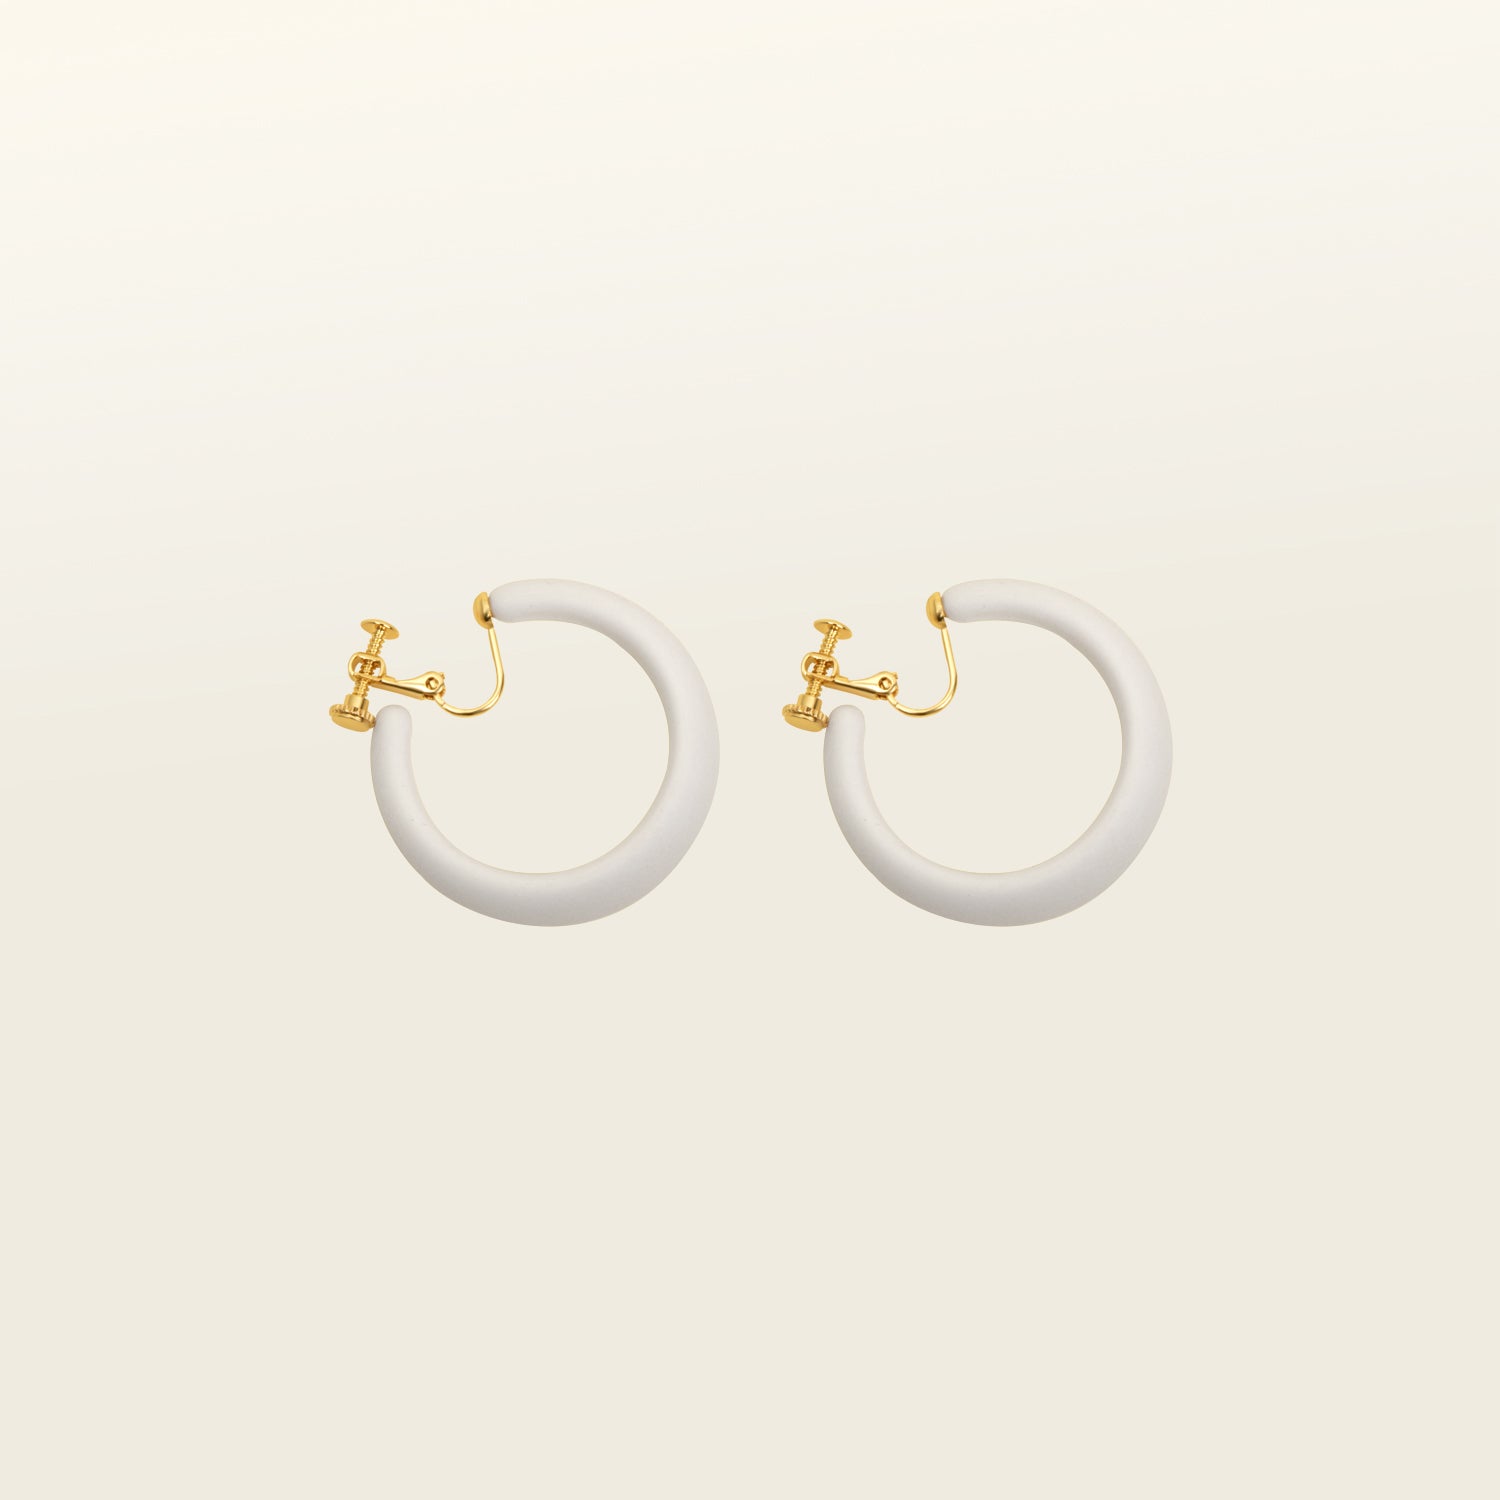 Modern white clip-on earrings featuring a secure screwback closure, suitable for various ear types. These earrings can be manually adjusted for a personalized fit. Crafted from gold tone copper metal alloy and acrylic.